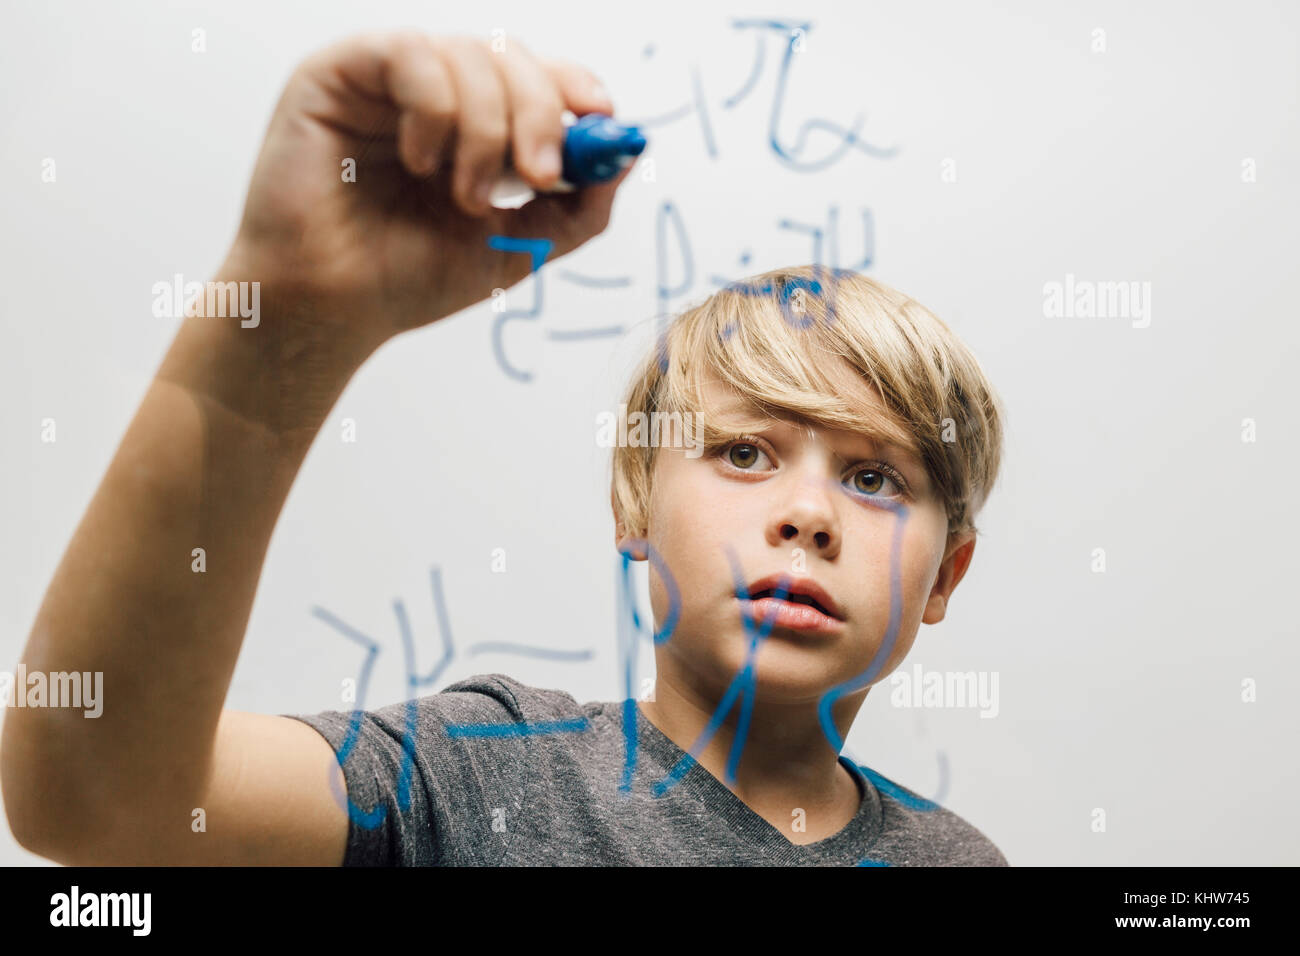 Close up of boy's hand writing equation onto glass wall Stock Photo